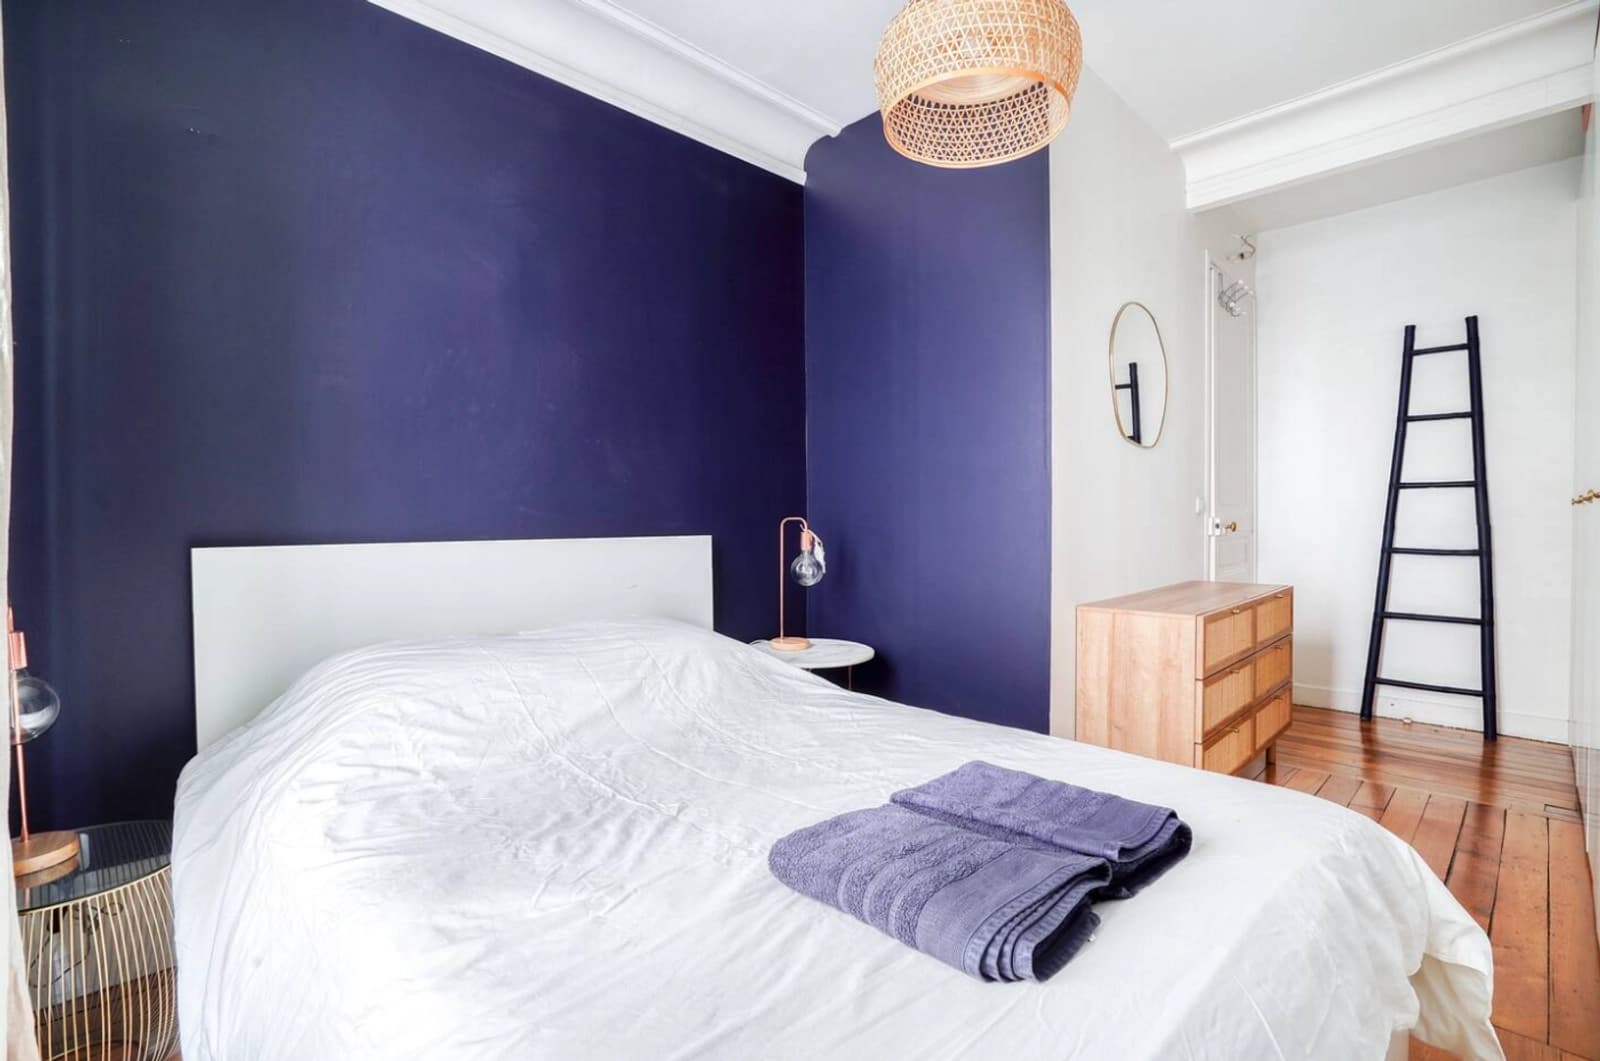 Space Haussmann apartment in the heart of Pigalle - 5